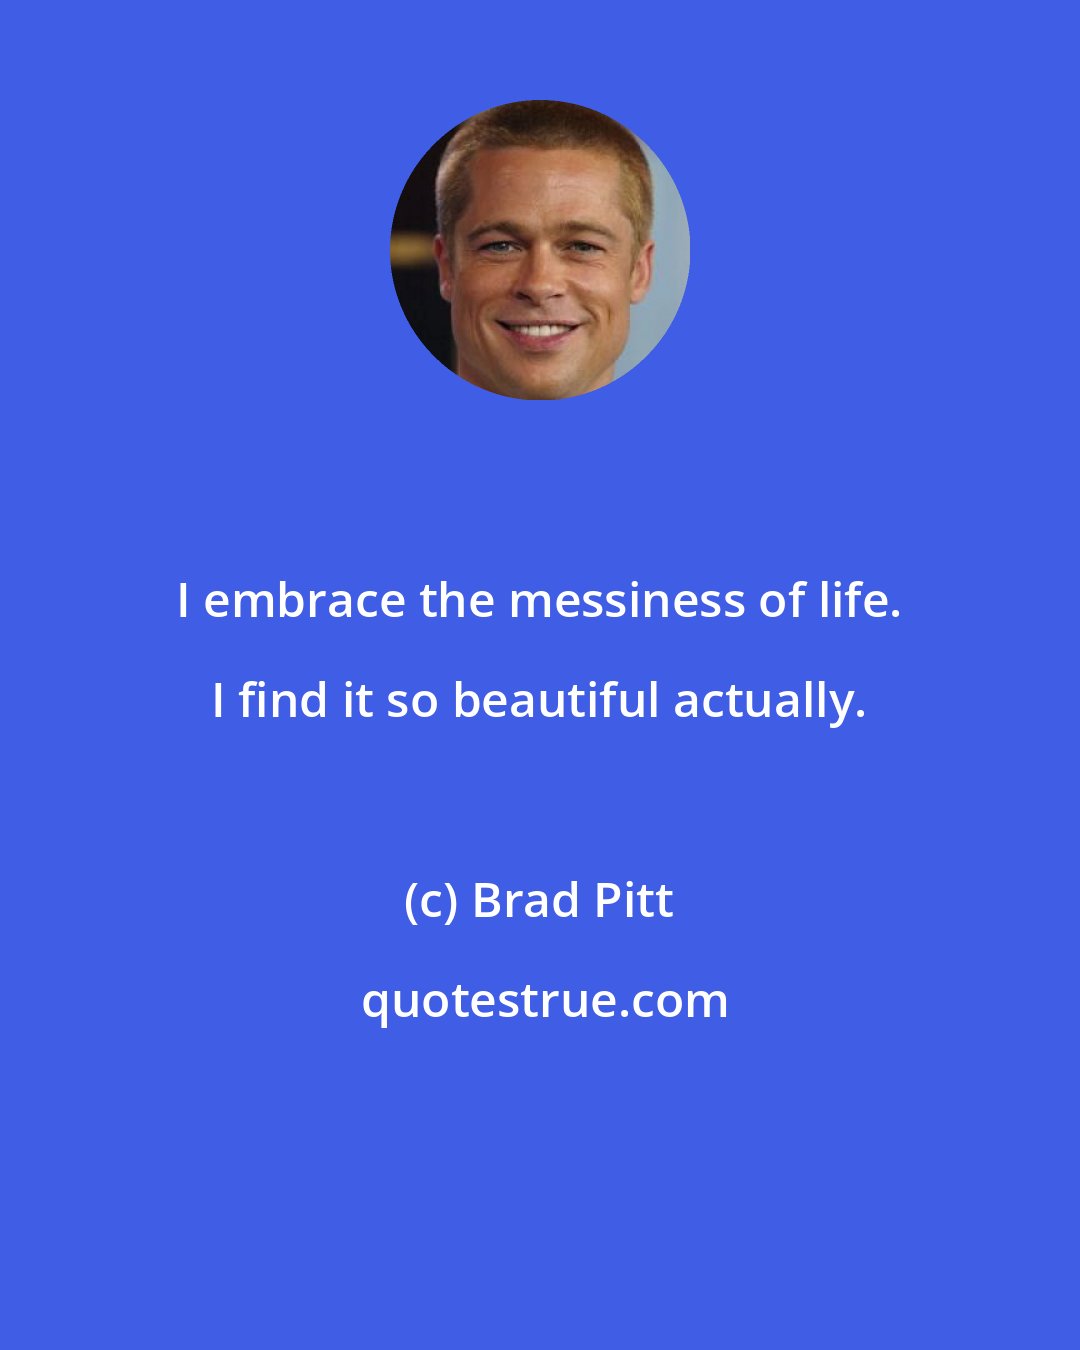 Brad Pitt: I embrace the messiness of life. I find it so beautiful actually.